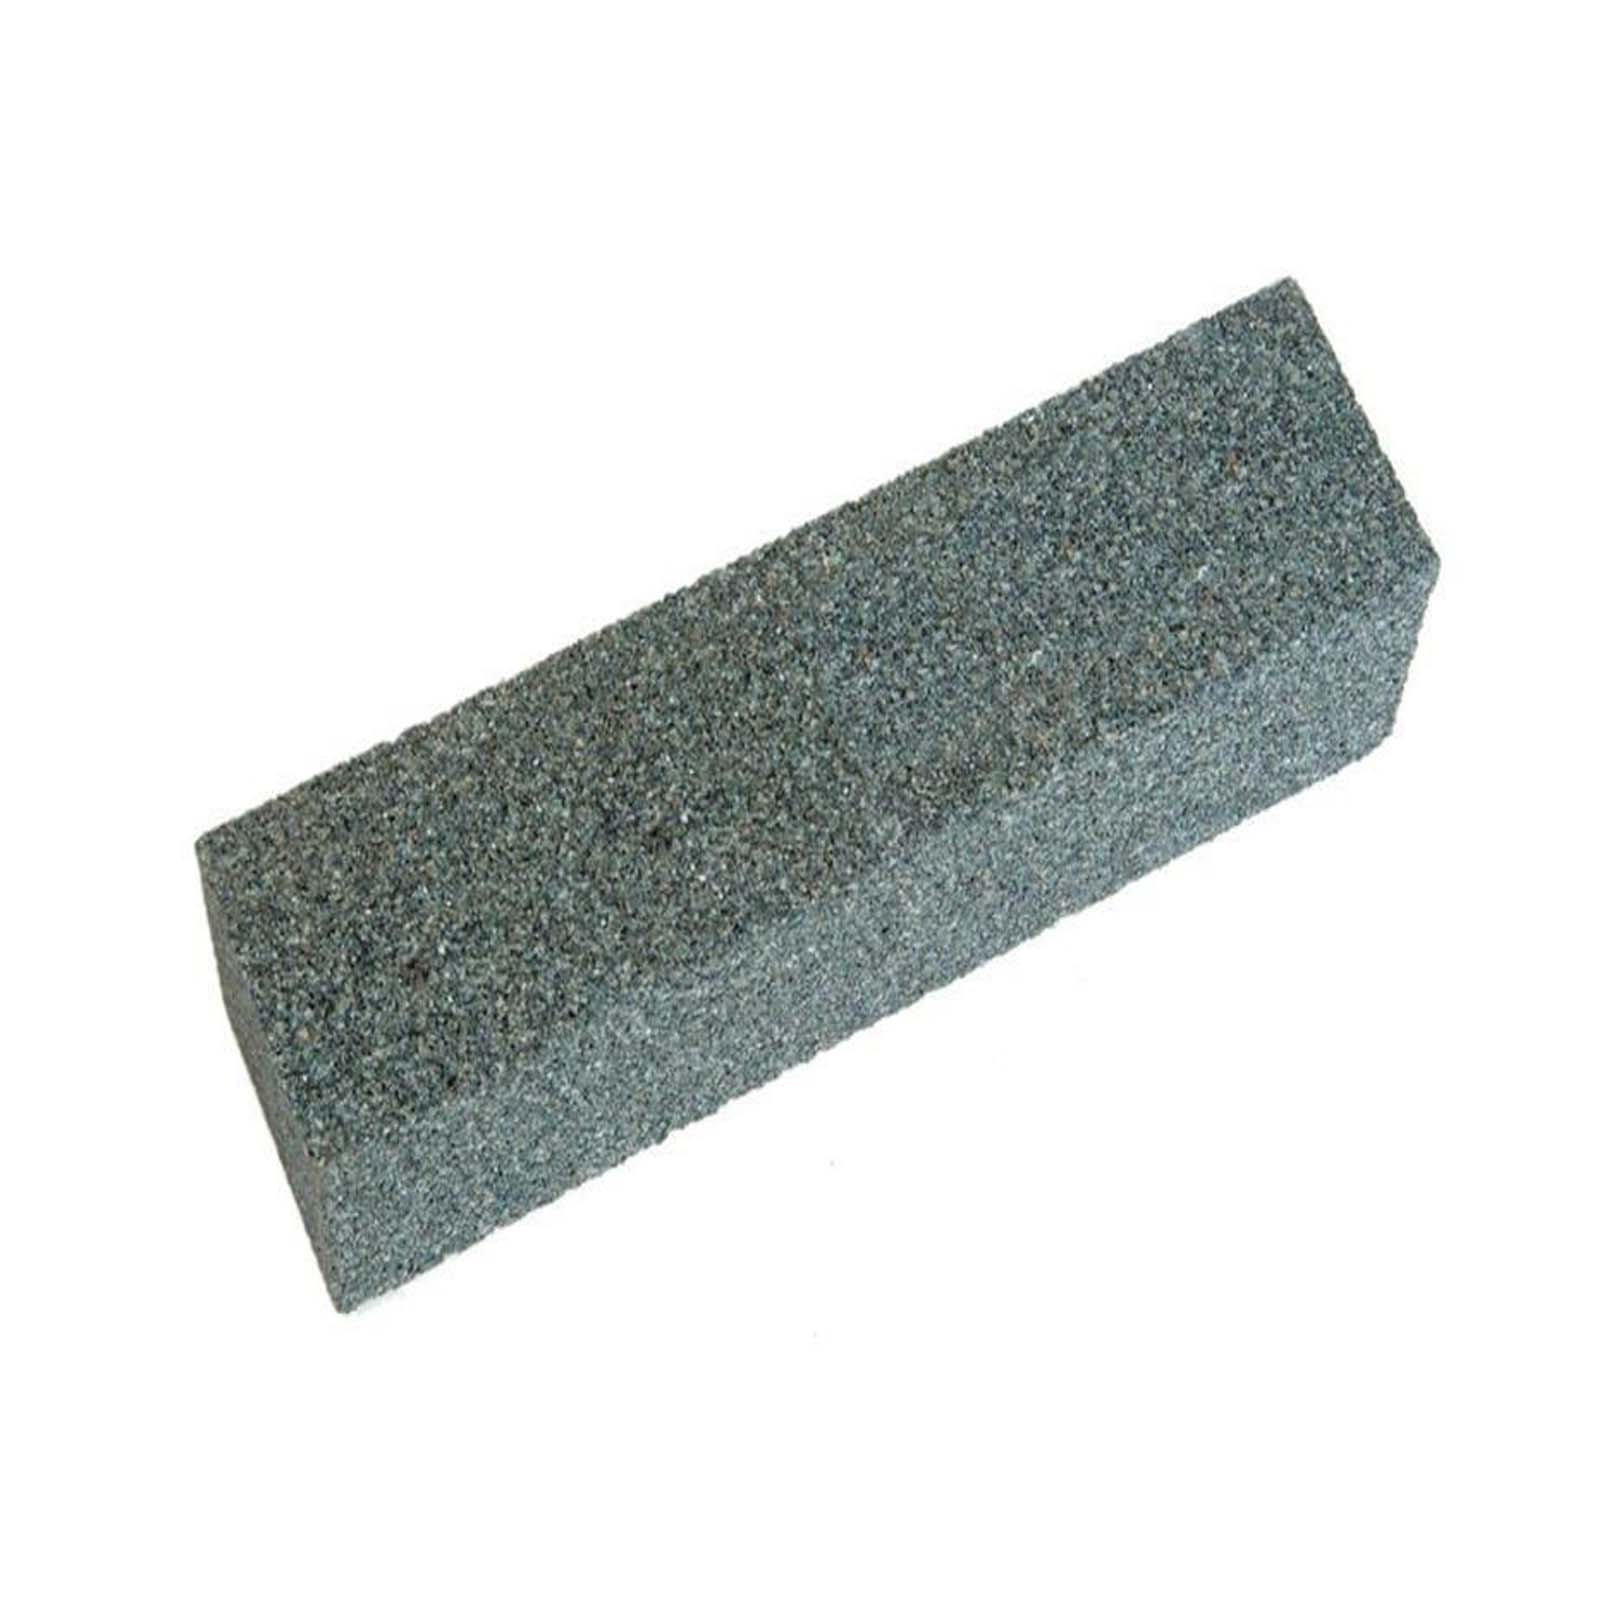 Universal Dressing Brick for Grinding Wheels and Discs